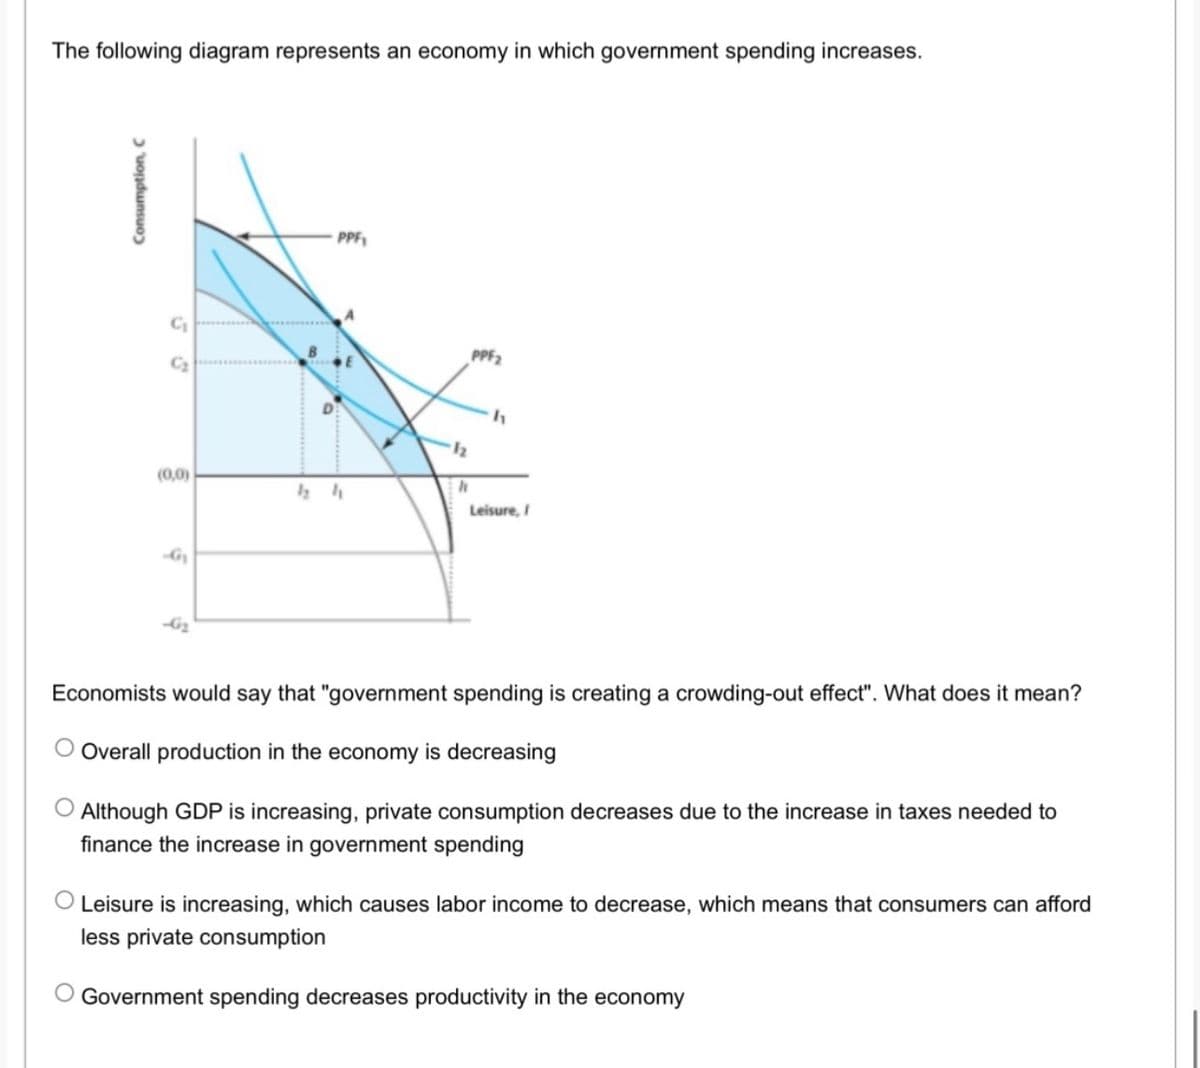 The following diagram represents an economy in which government spending increases.
PPF,
PPF2
C2
(0,0)
Leisure, I
Economists would say that "government spending is creating a crowding-out effect". What does it mean?
O Overall production in the economy is decreasing
O Although GDP is increasing, private consumption decreases due to the increase in taxes needed to
finance the increase in government spending
Leisure is increasing, which causes labor income to decrease, which means that consumers can afford
less private consumption
O Government spending decreases productivity in the economy
Consumption, C
